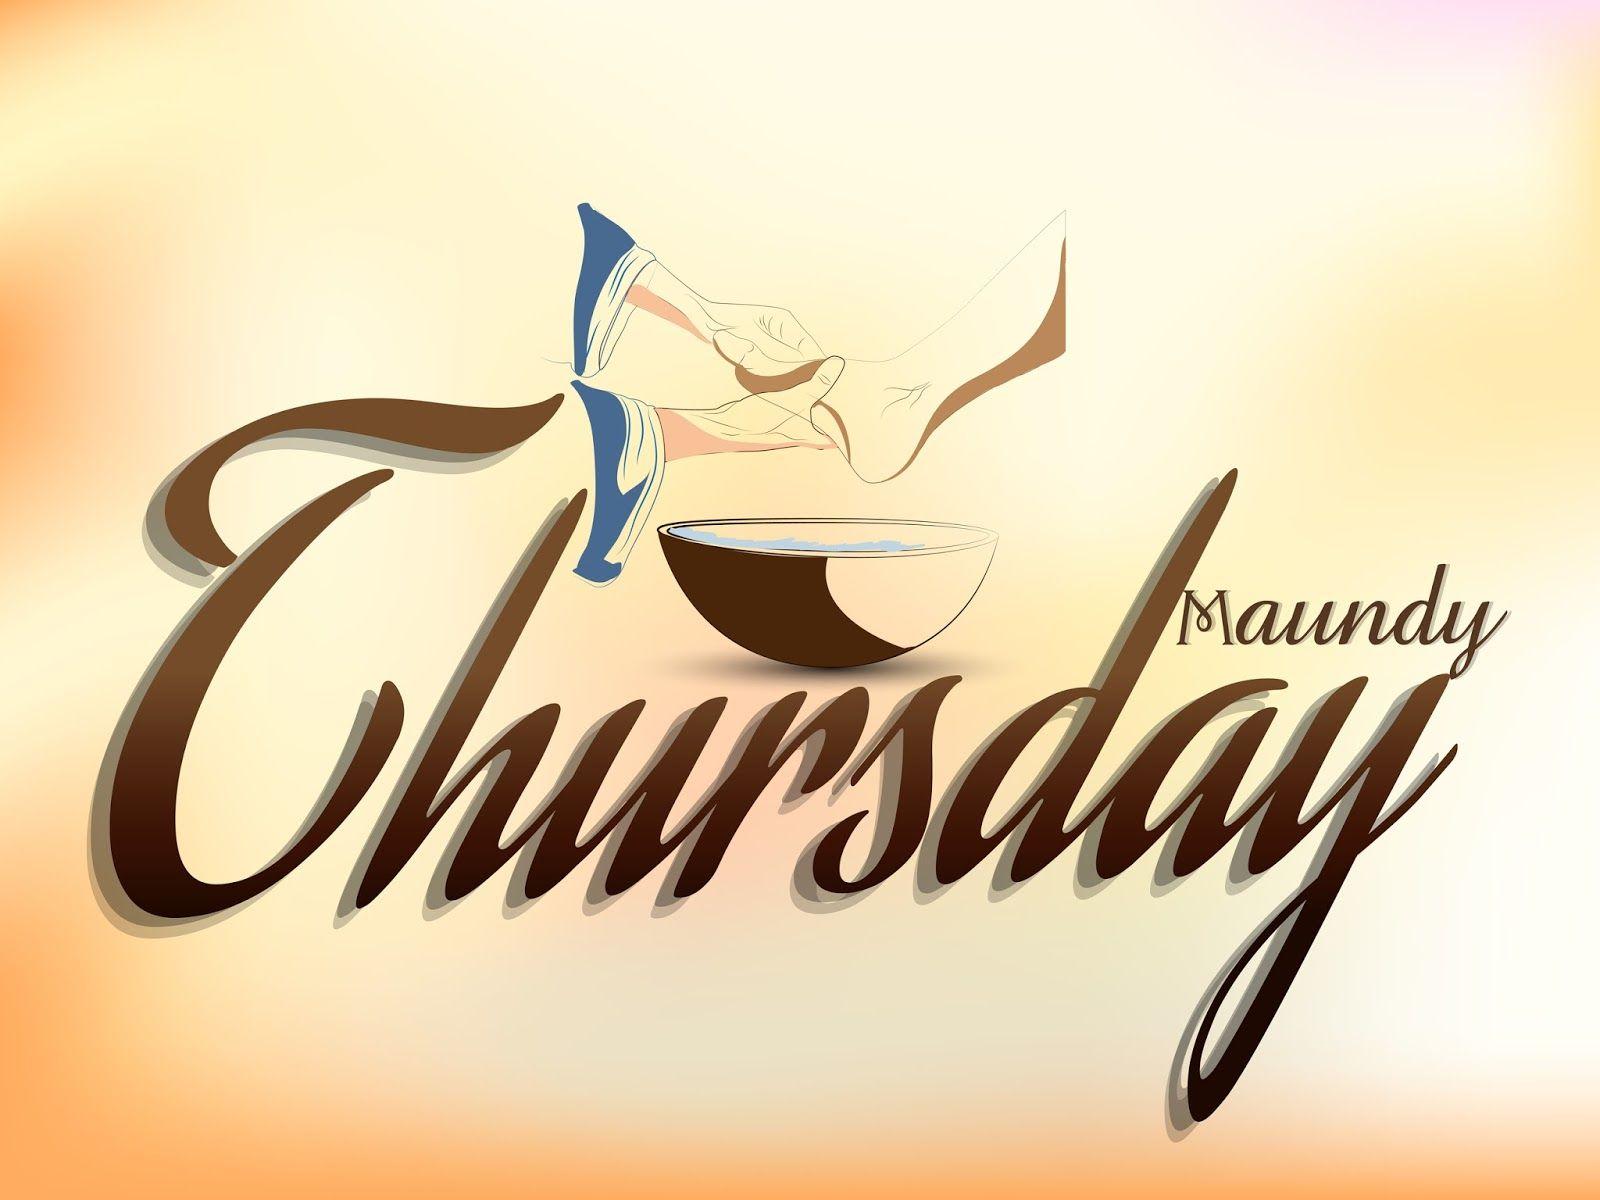 Latest 2018 ! Maundy Thursday Image Wishes Quotes Picture